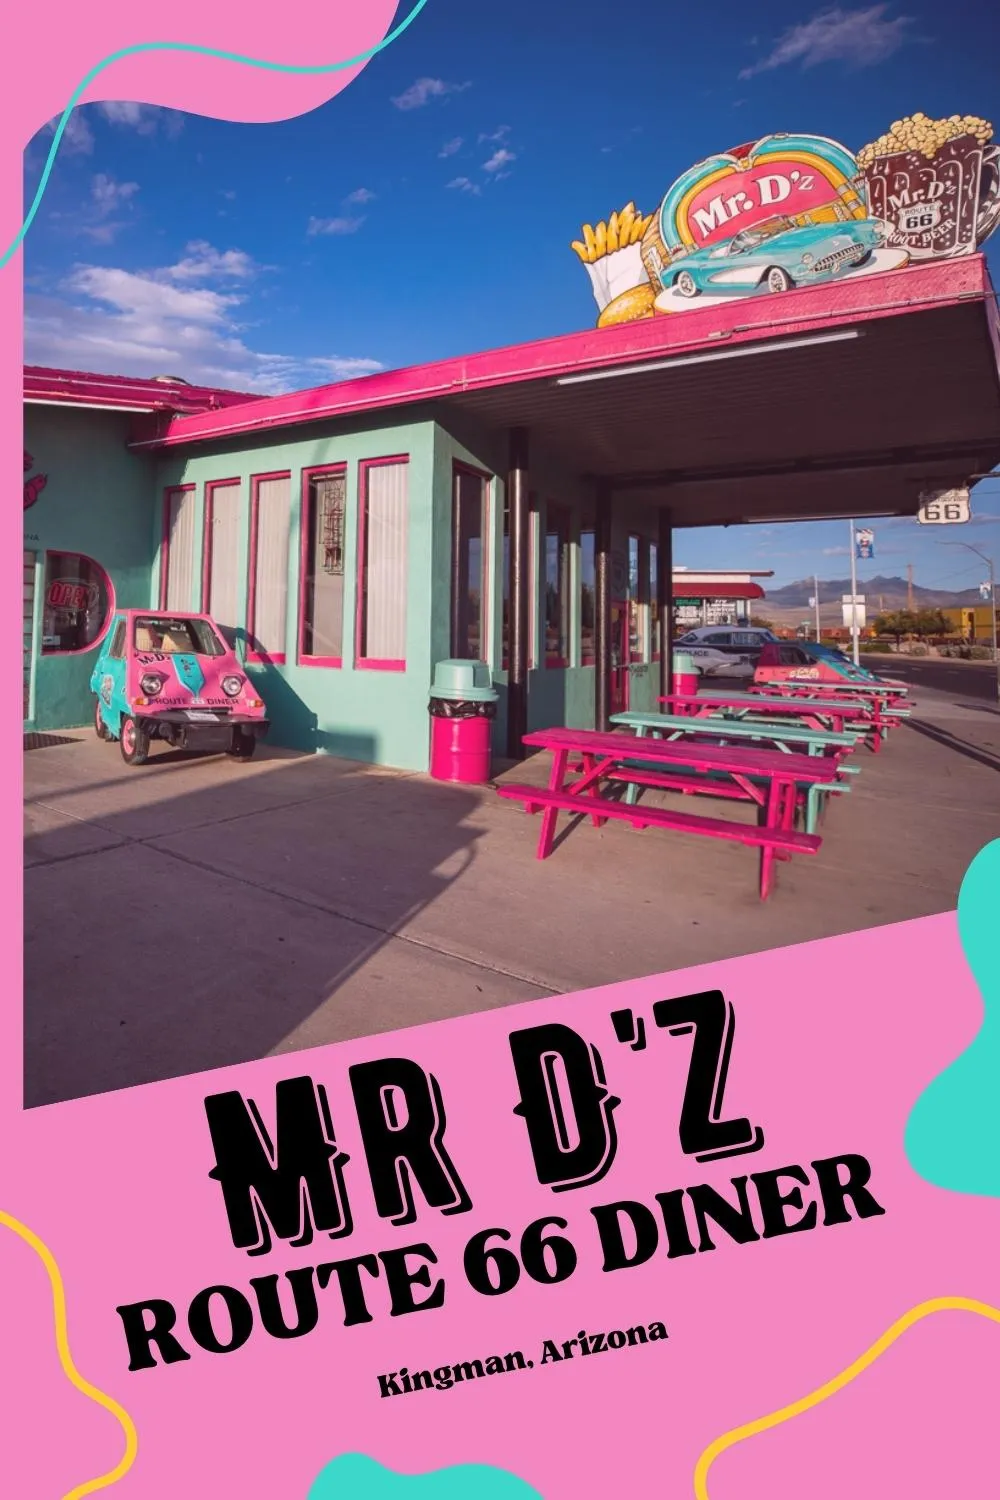 On road trips you're often trying to drive from point A to point B. But on a Route 66 road trip don't forget about point D, Mr D. Mr D'z Route 66 Diner in Kingman, Arizona is a quintessential stop for breakfast, lunch, or dinner on The Mother Road. The record-shaped menu is full of classic diner fare. There are omelets, pancakes, burgers, hot dogs, pizza, and old-school classics. Stop by on your Route 66 road trip in Arizona. #Route66 #Route66RoadTrip #ArizonaRoute66 #Route66Diner #Diner